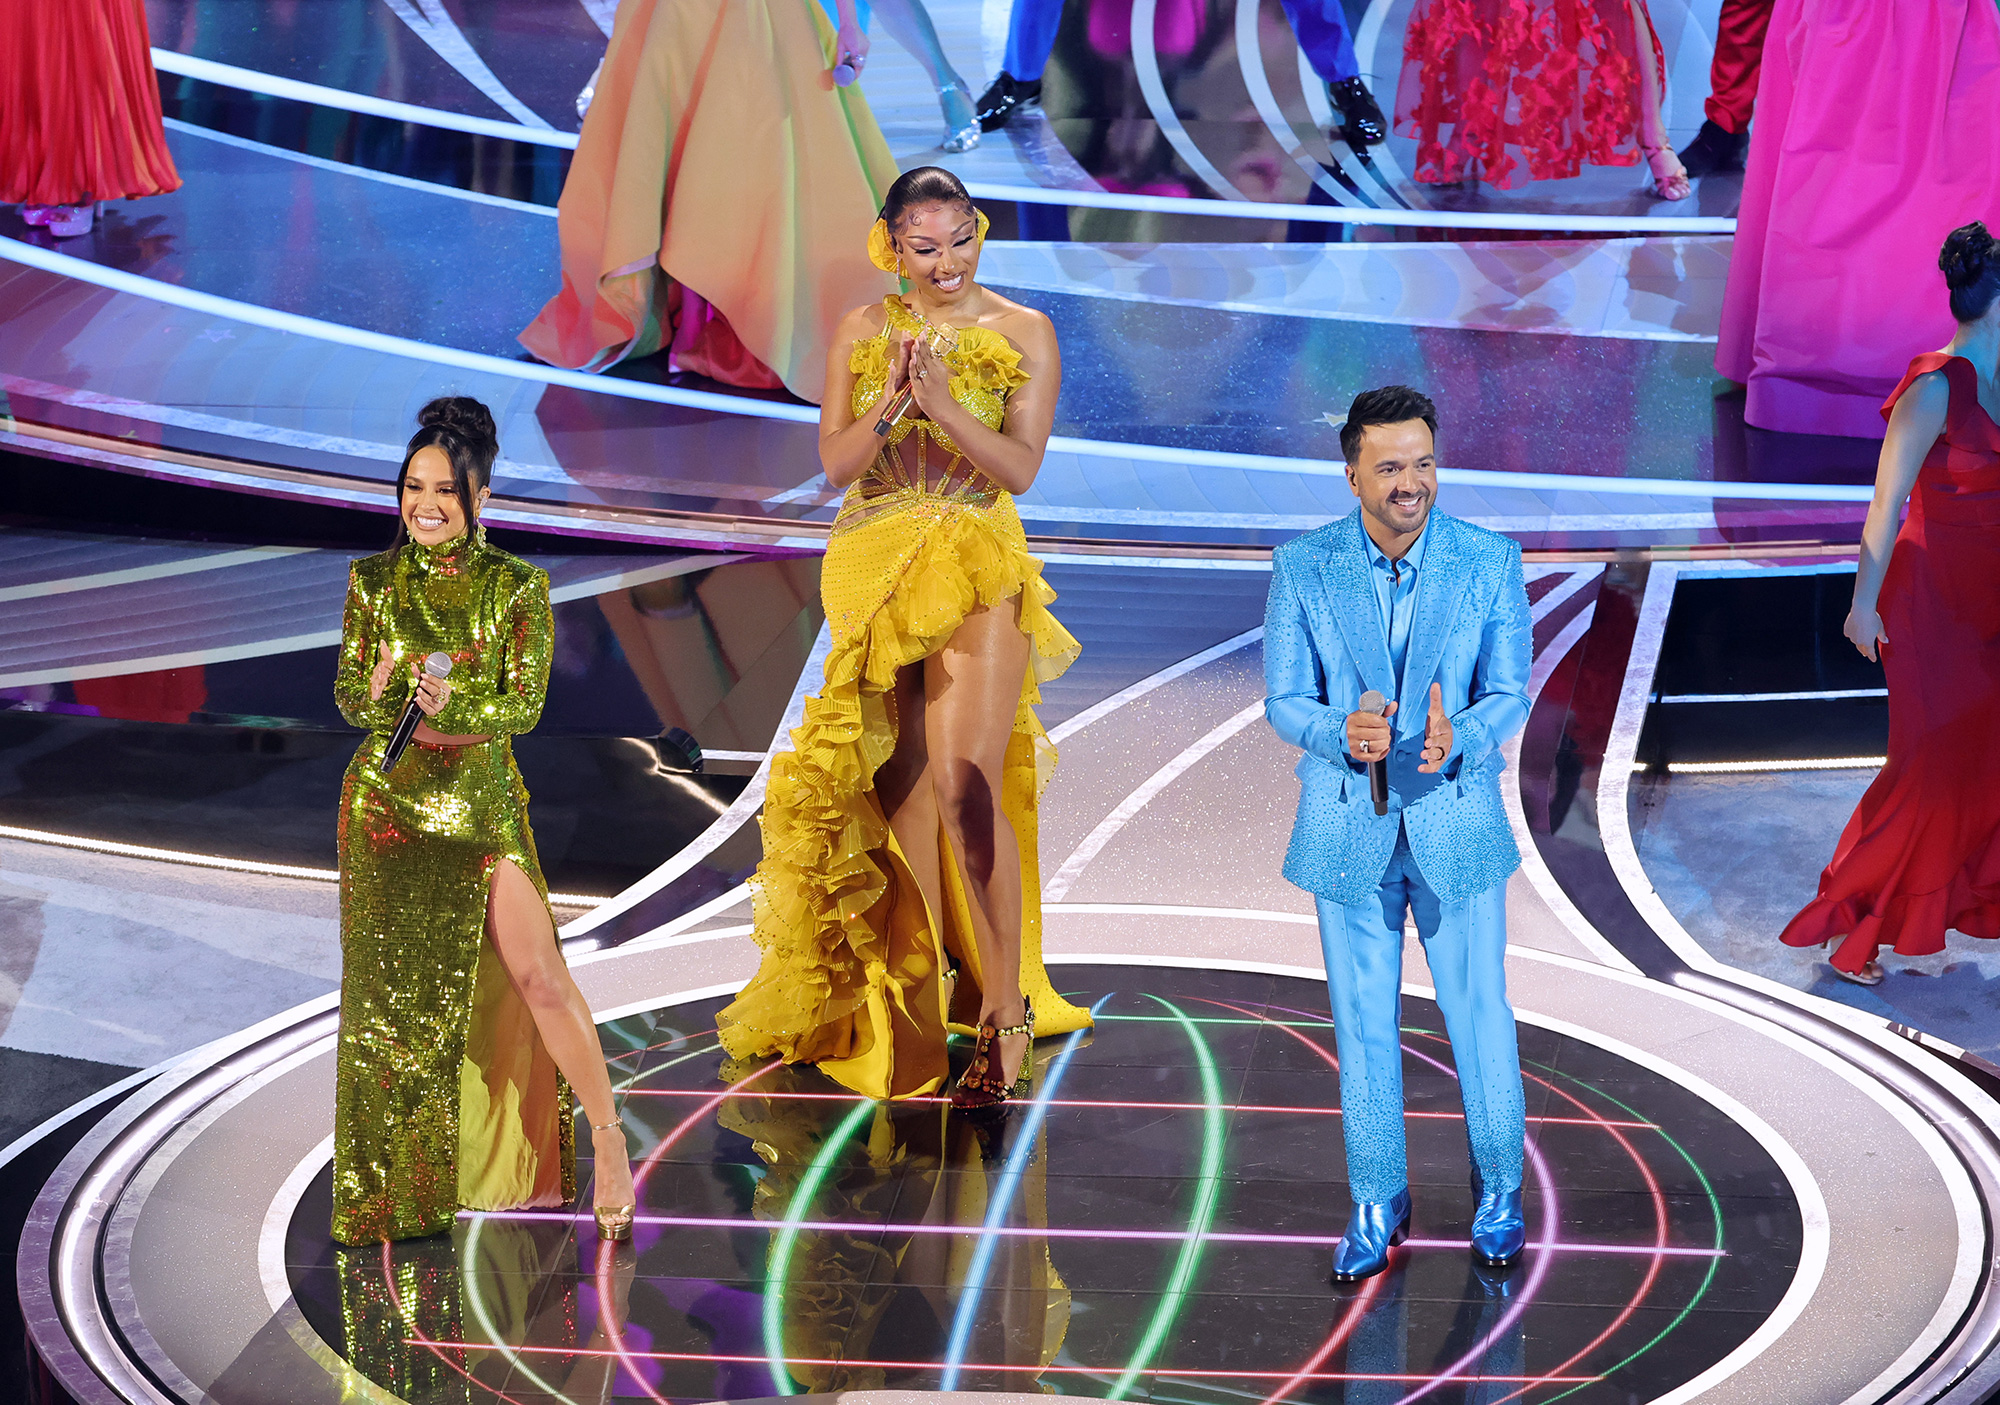 Becky G, Megan Thee Stallion, and Luis Fonsi perform onstage during the 94th Annual Academy Awards.